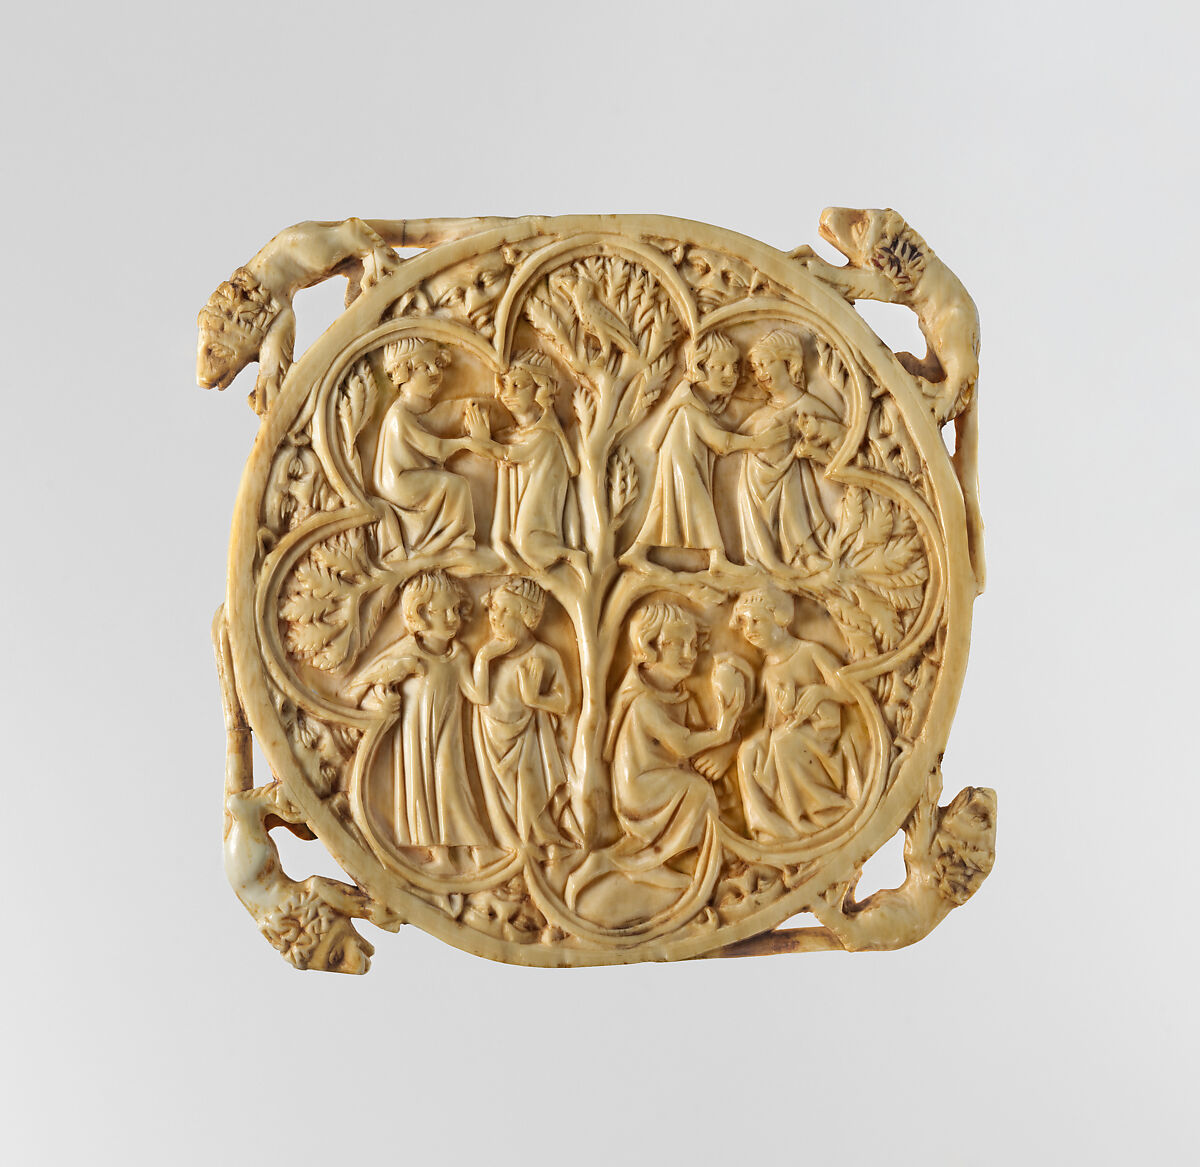 Mirror Case with scenes of paired lovers, Elephant Ivory, French 